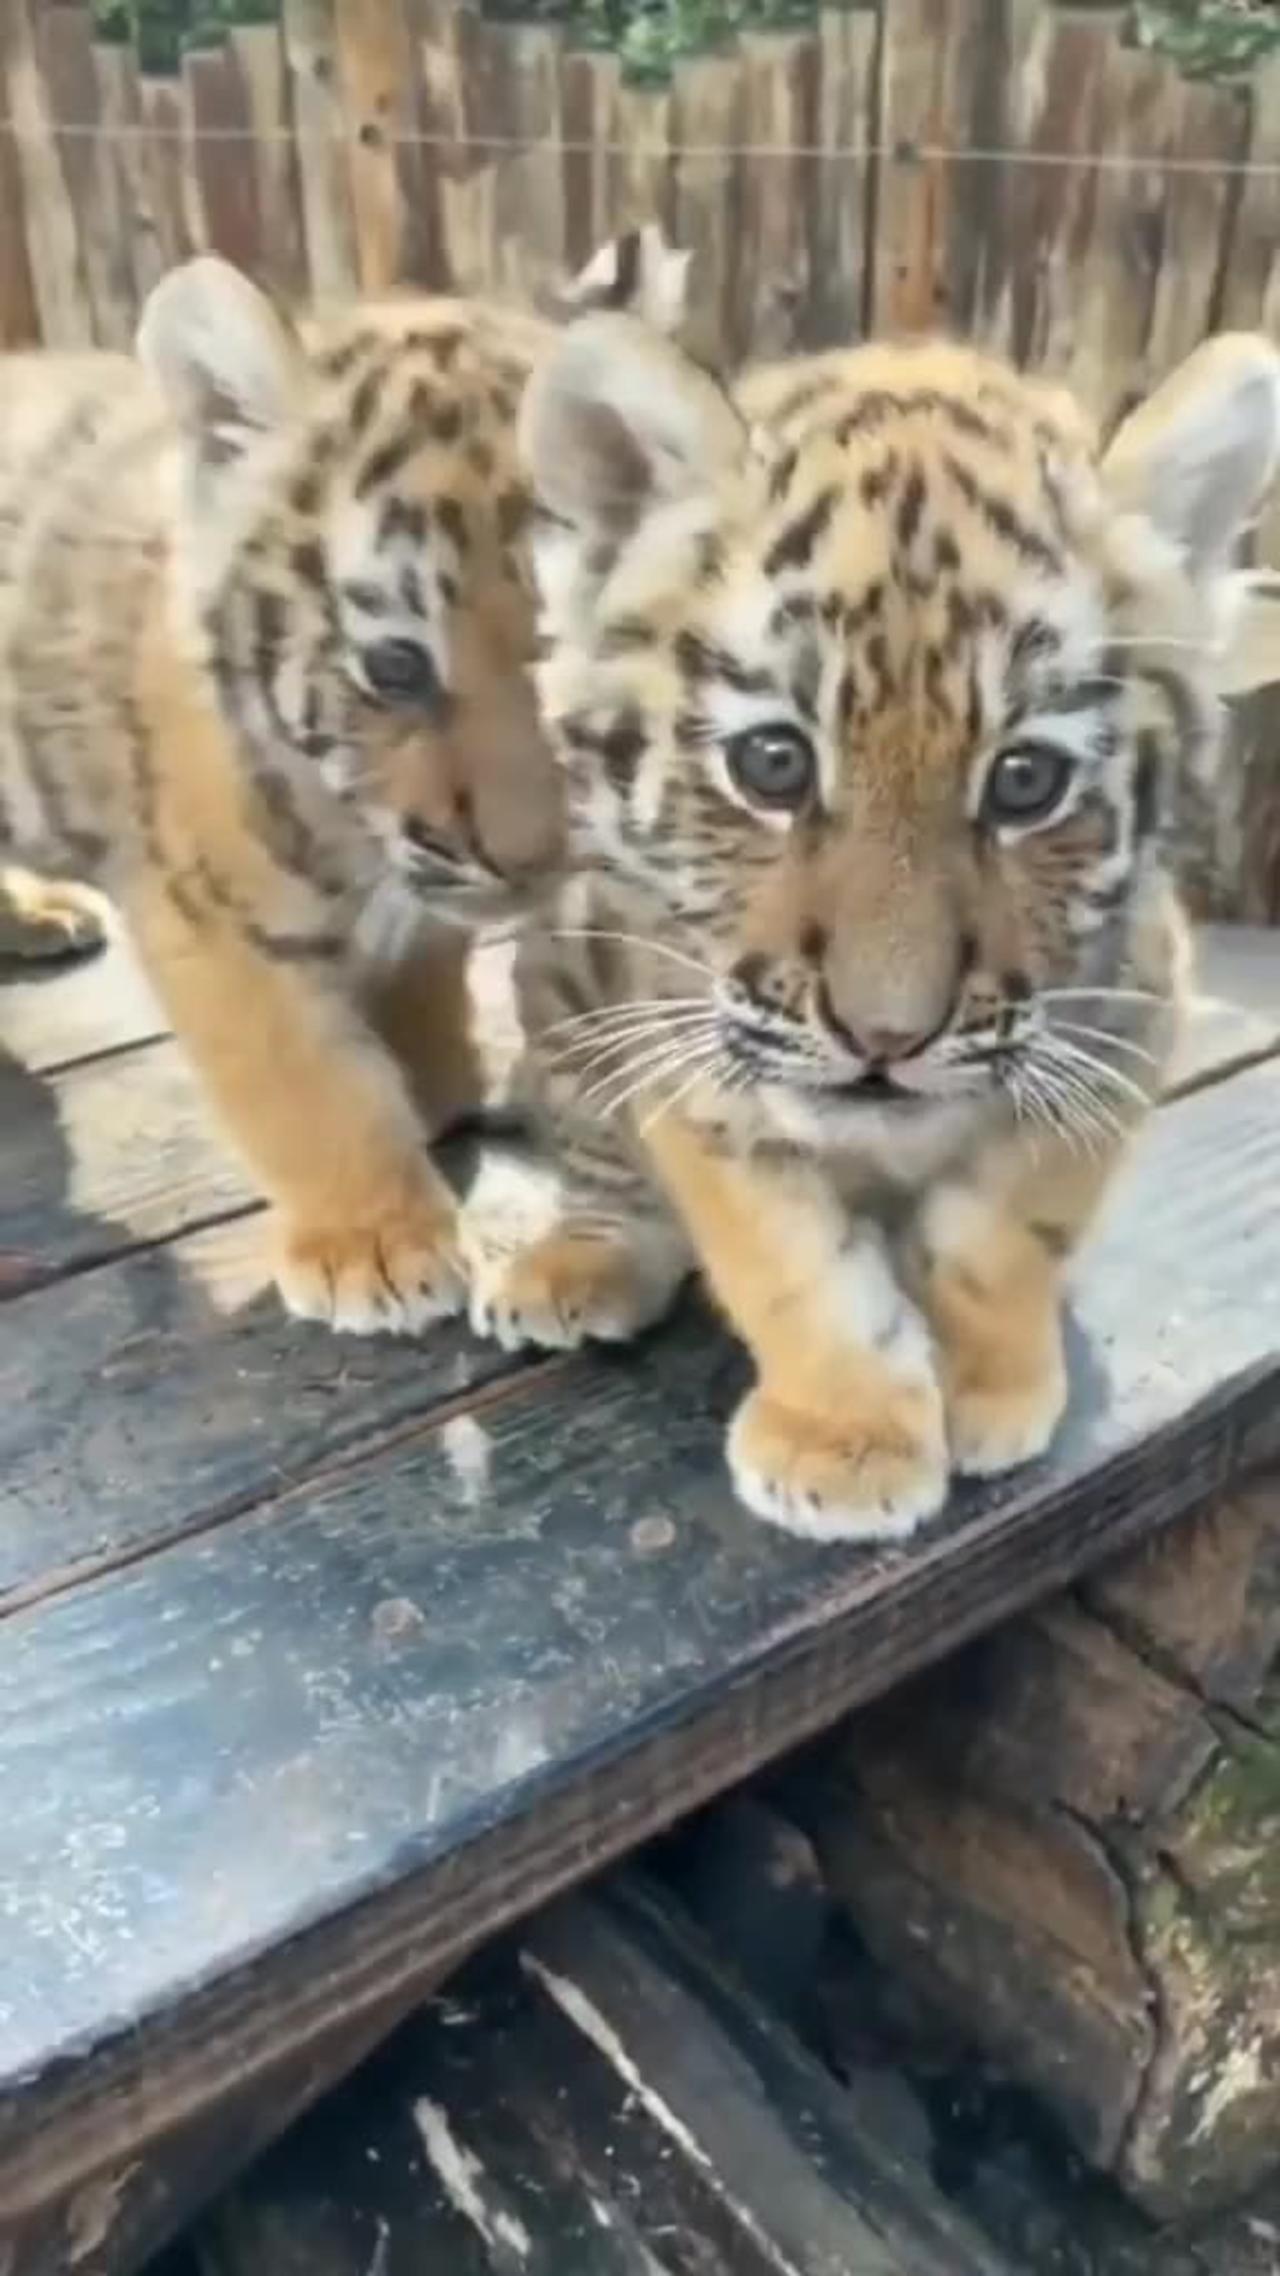 tiger, cute baby animals, The cute babies @tigers-videos